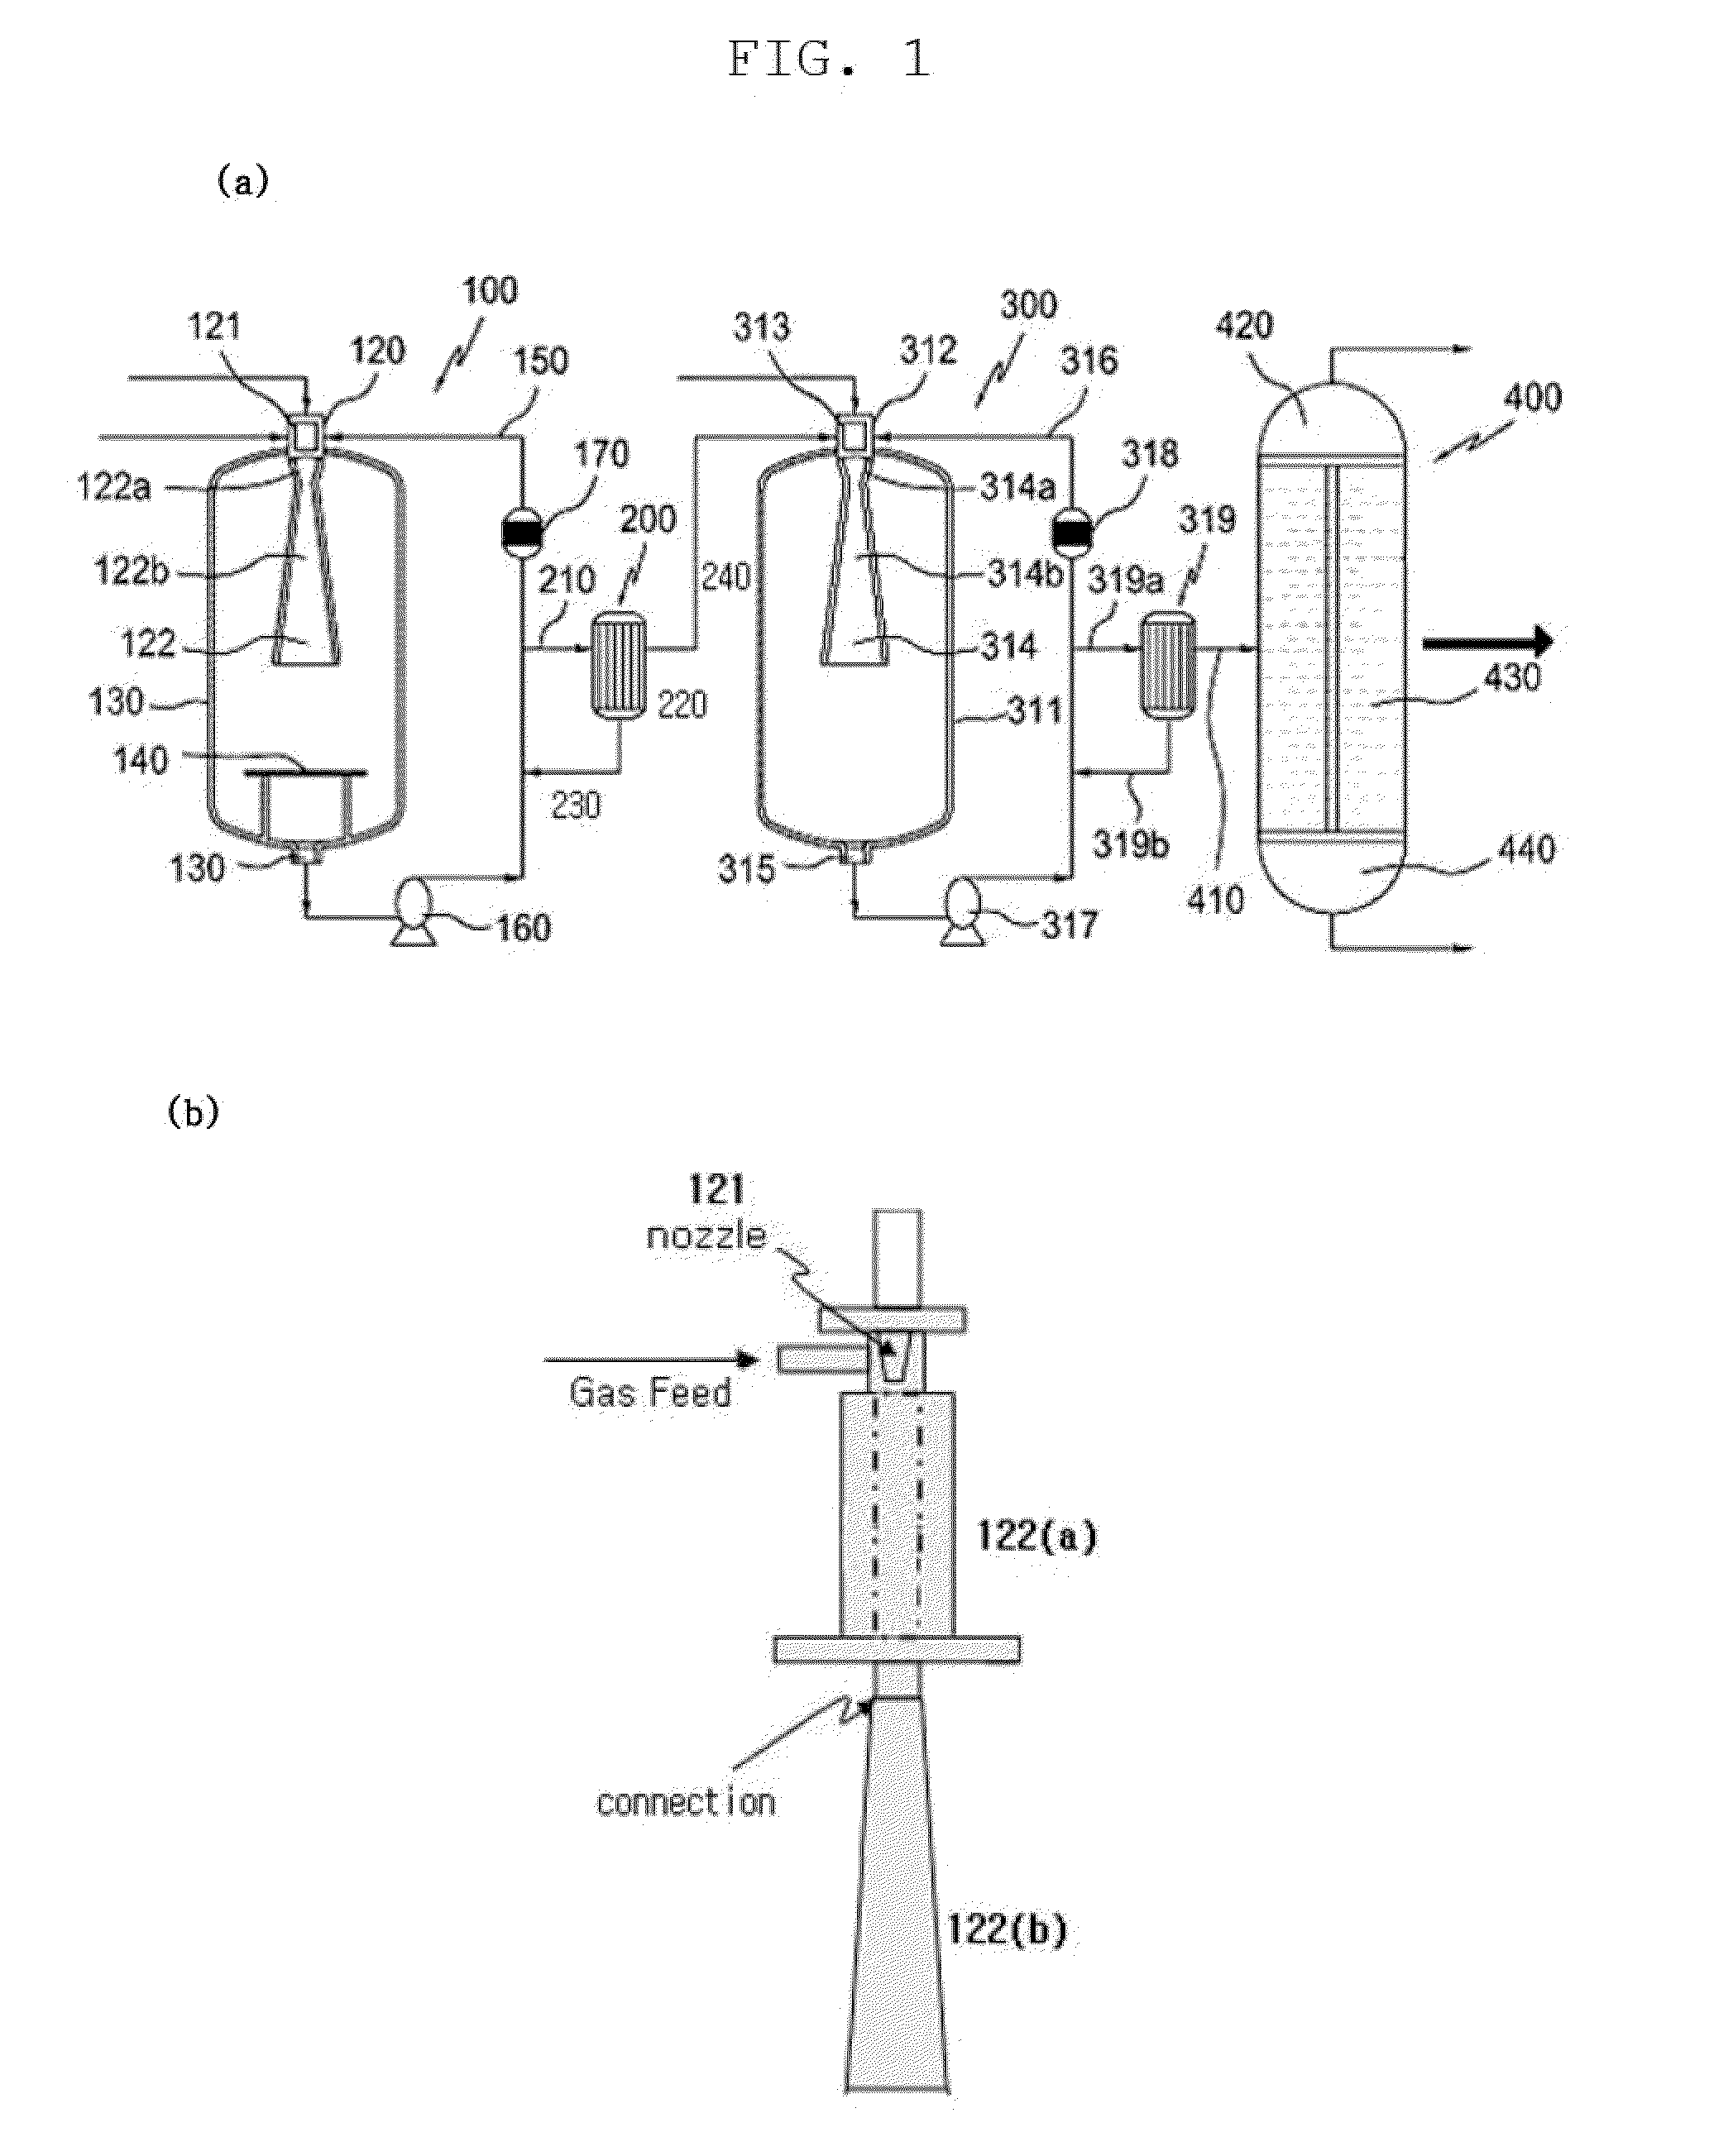 Apparatus for producing alcohols from olefins